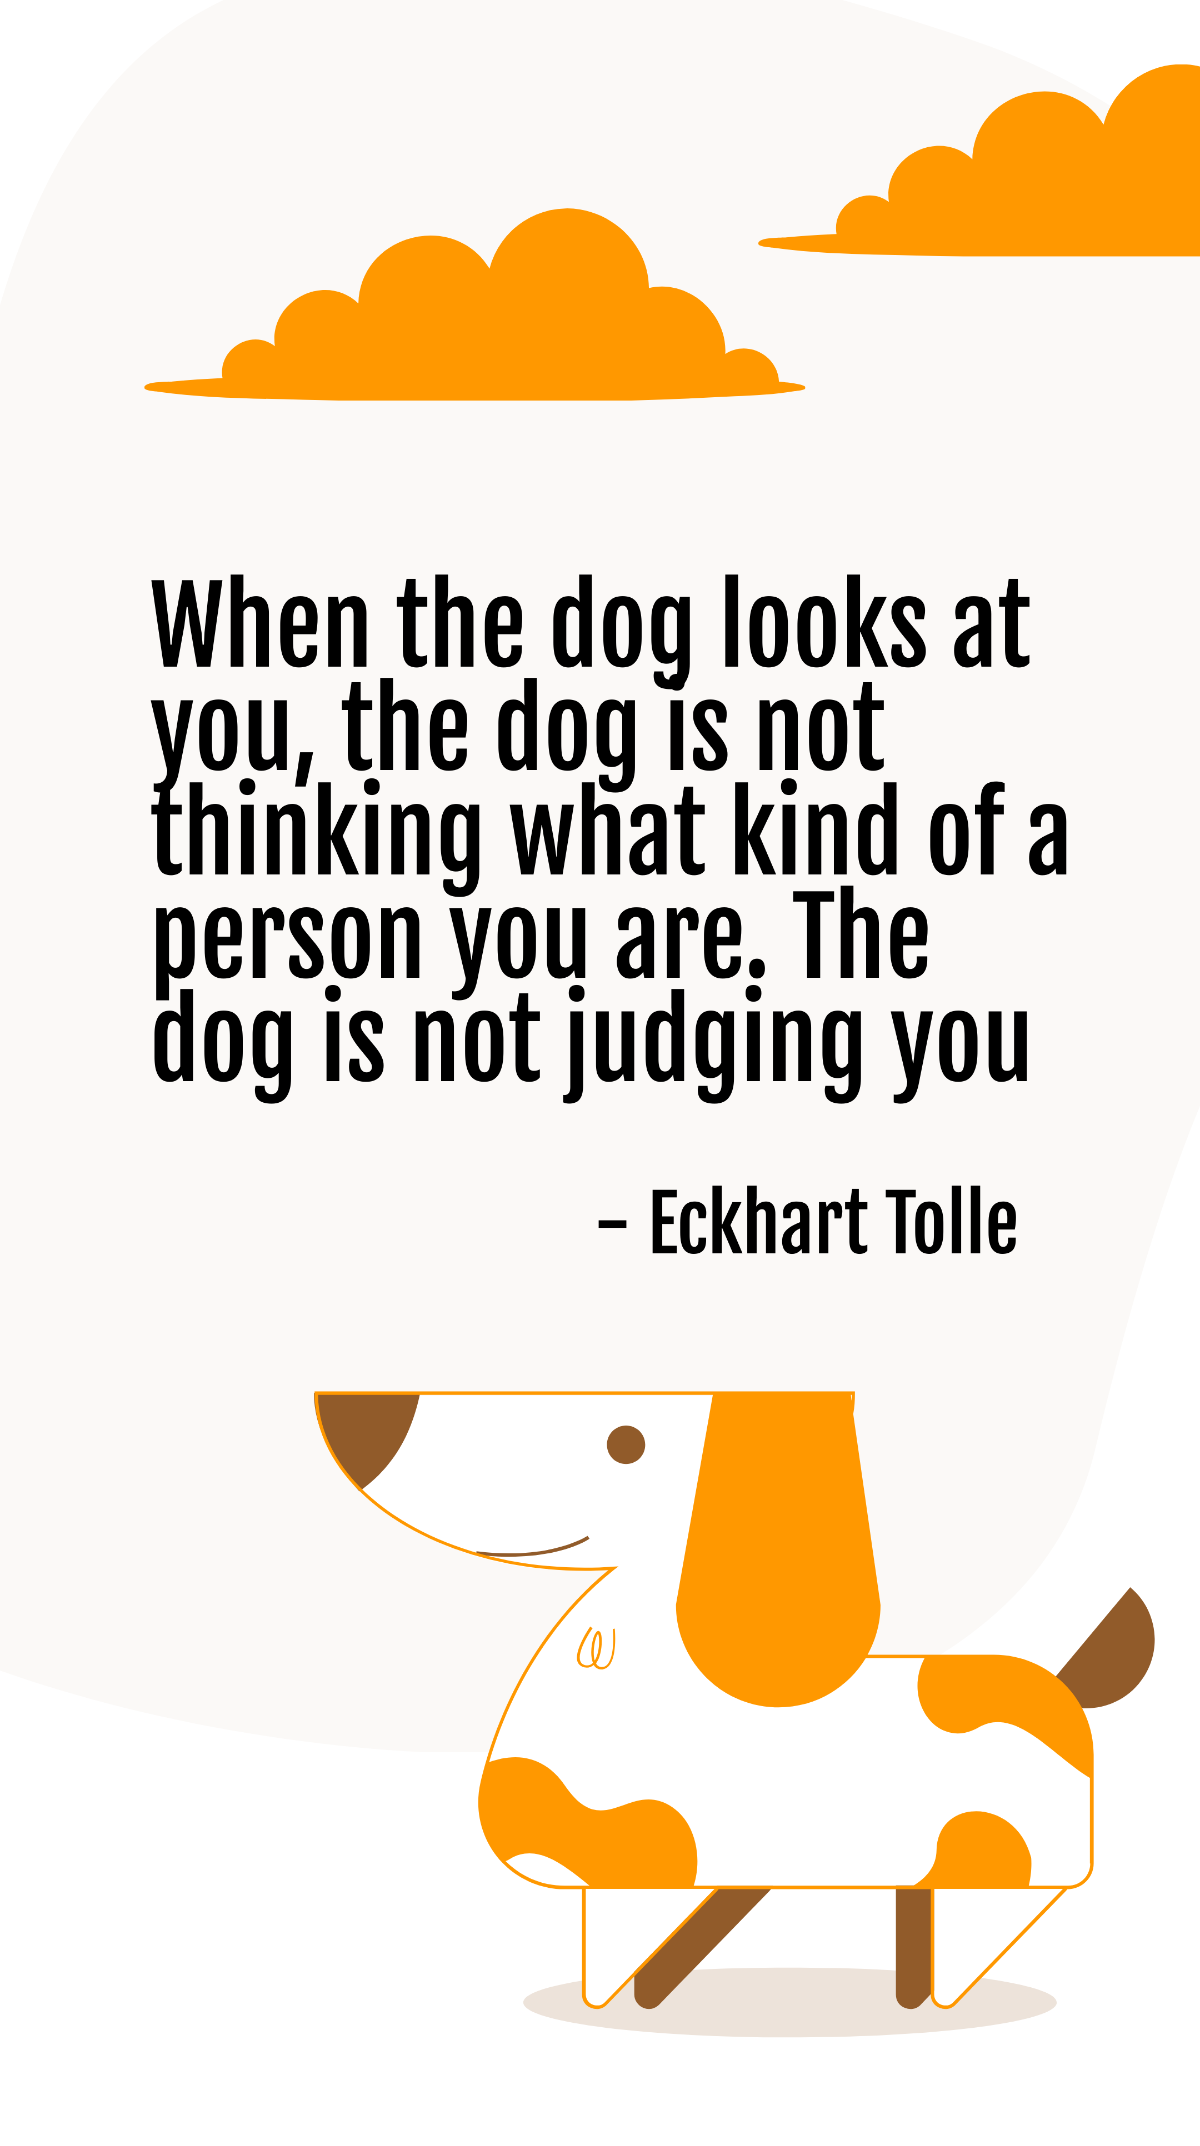 Eckhart Tolle - When the dog looks at you, the dog is not thinking what kind of a person you are. The dog is not judging you